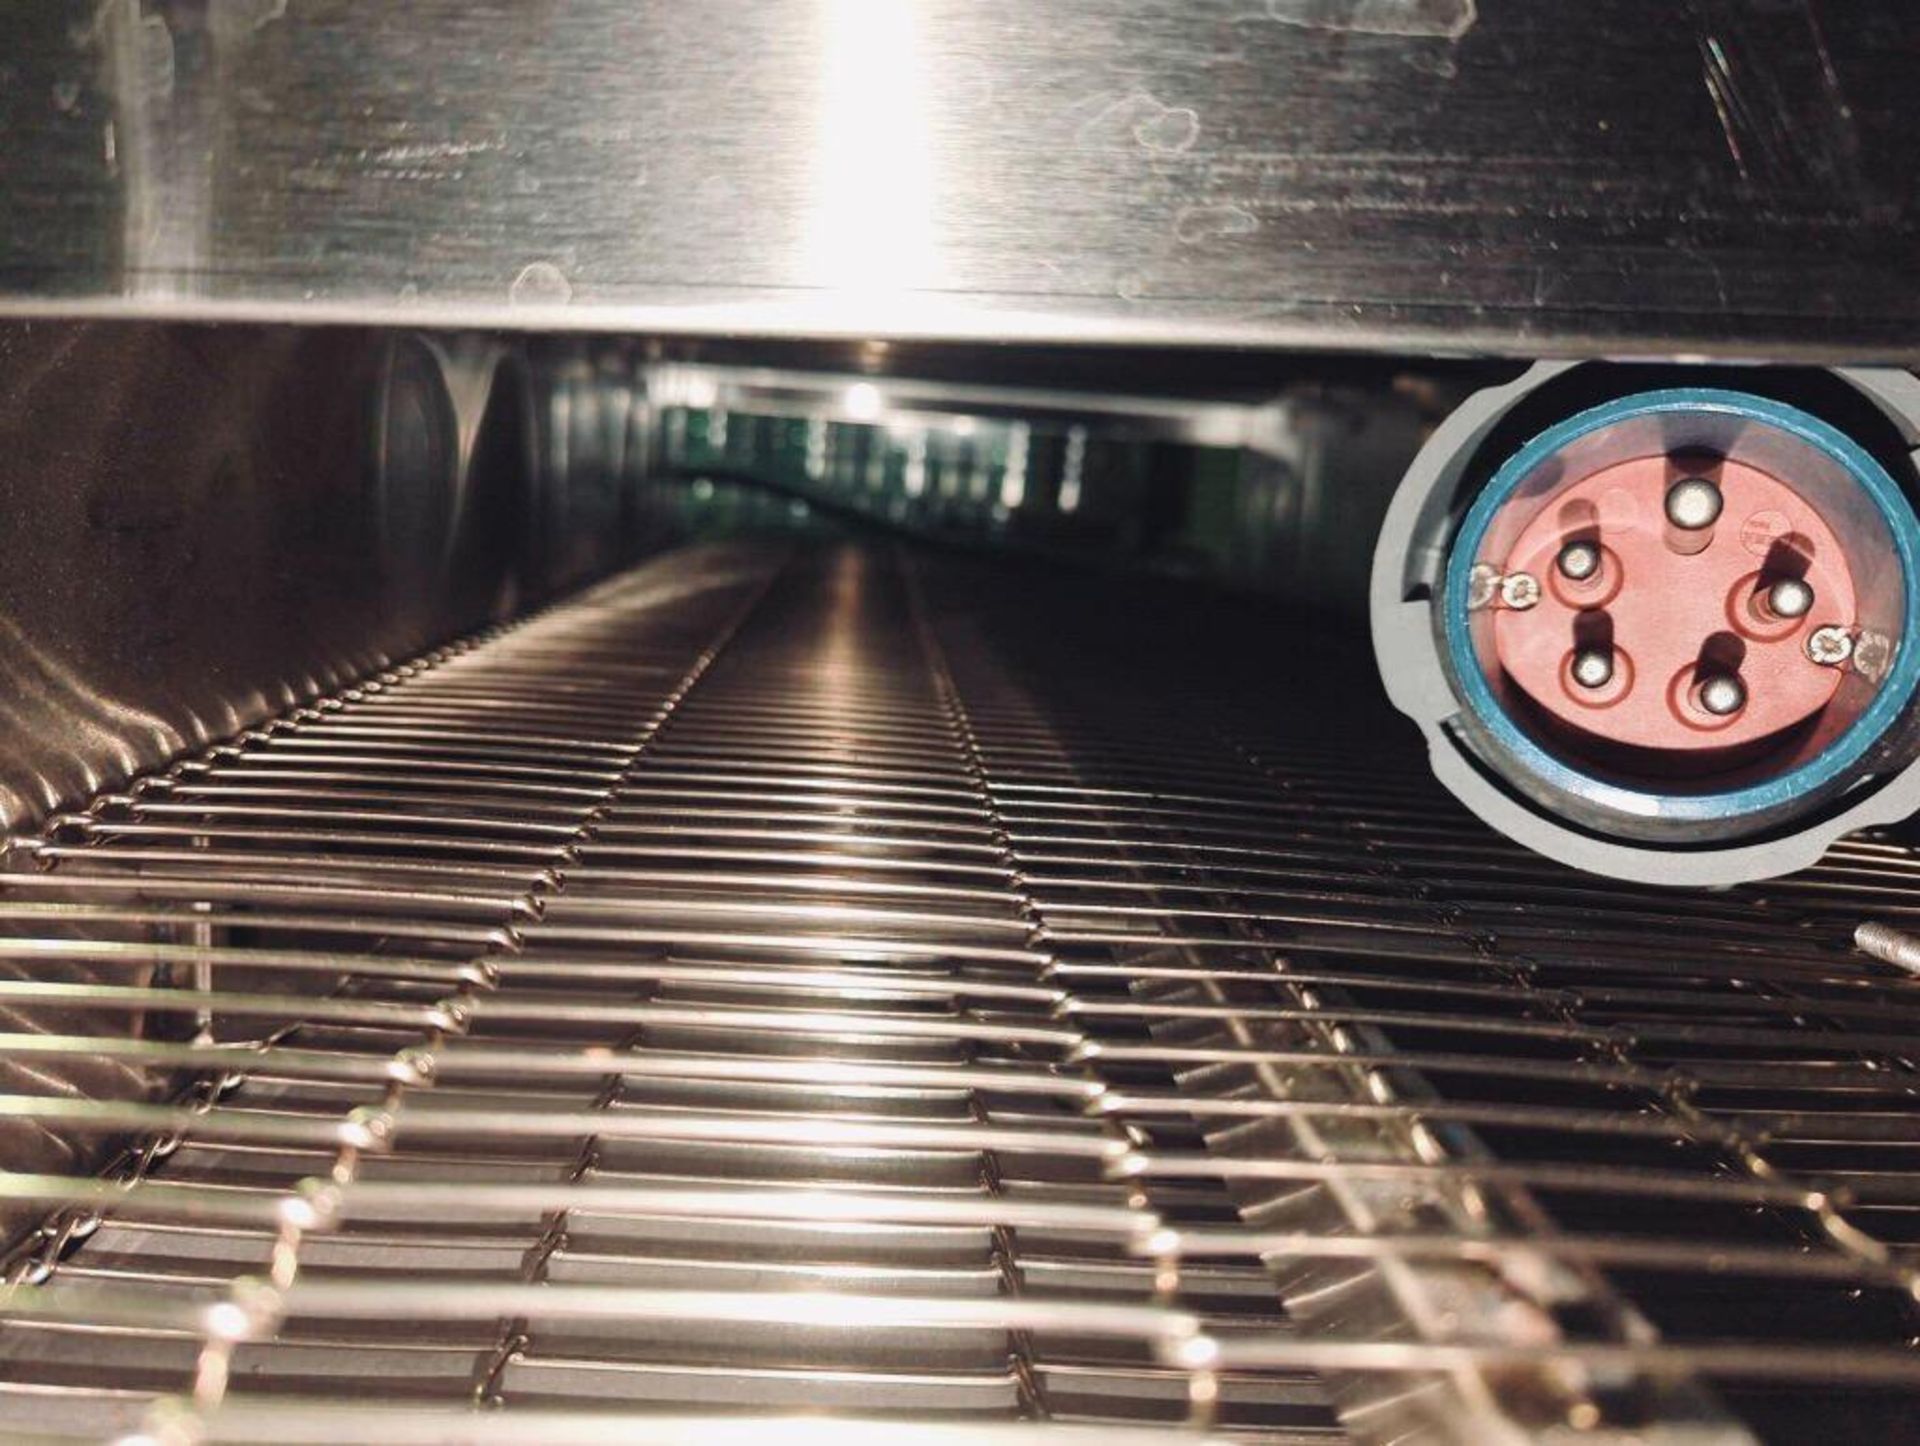 Vollrath JSO14 Stainless Steel Left To Right Variable Speed Tunnel Oven - Image 5 of 10